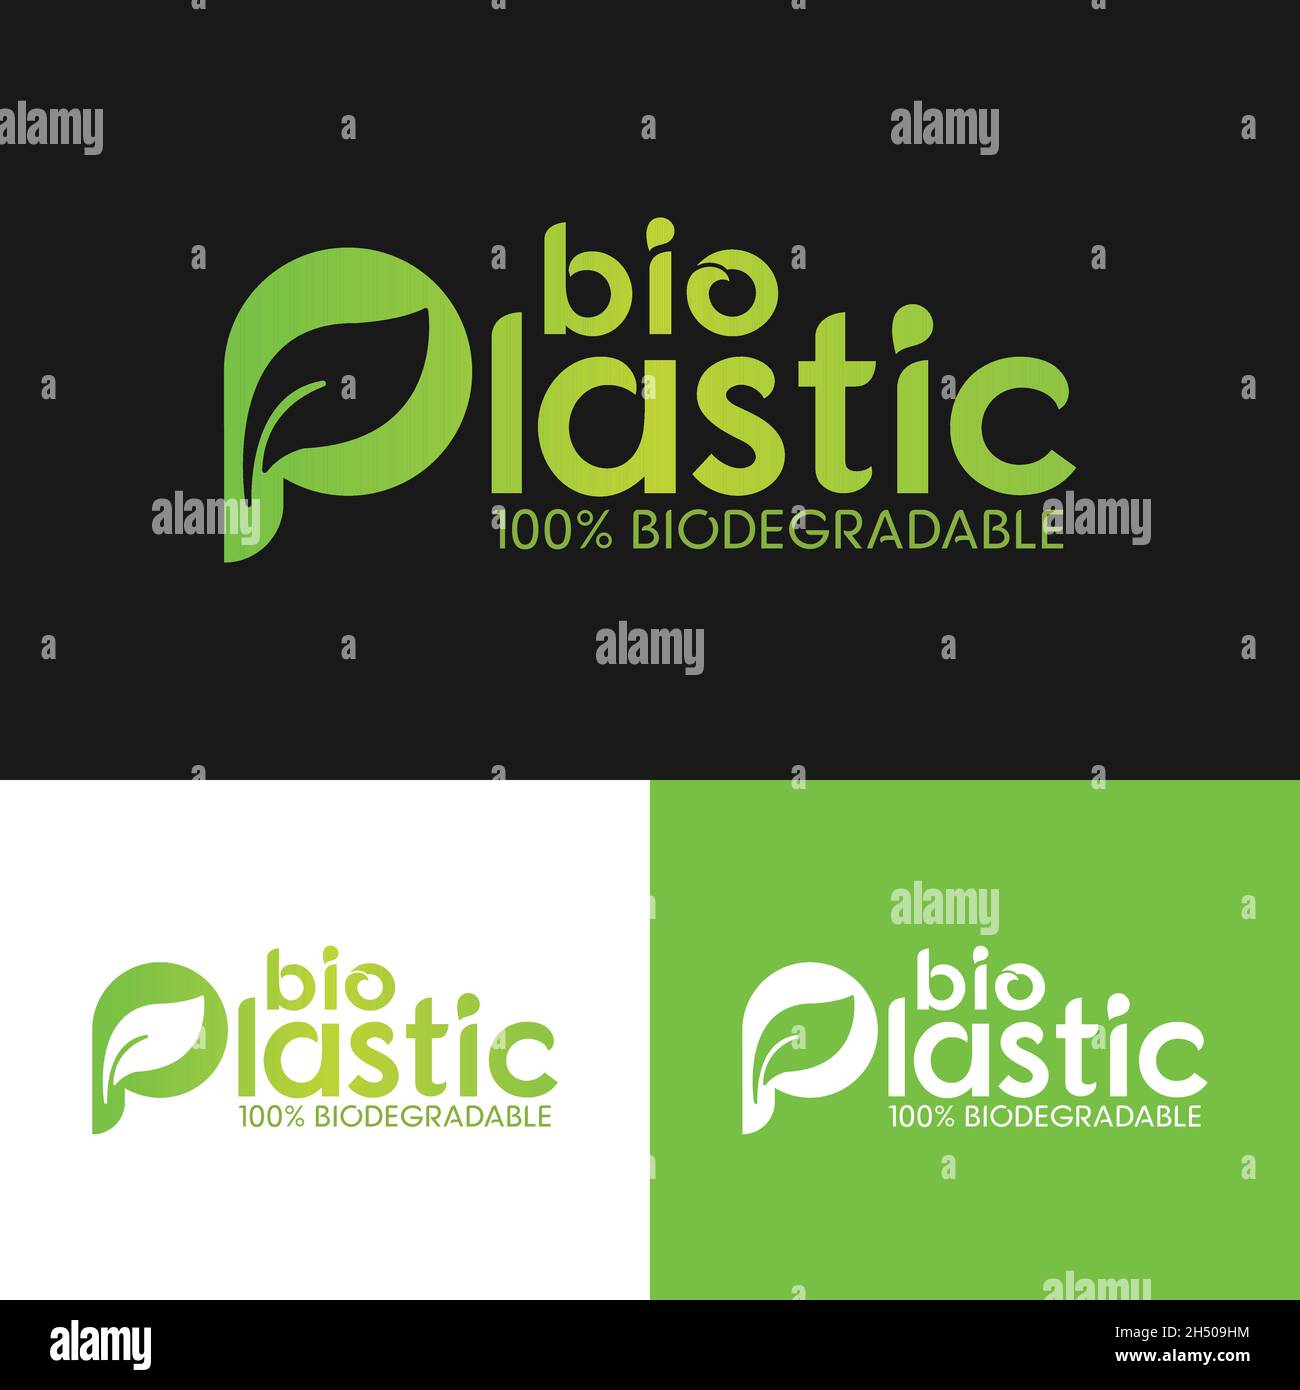 Bio Plastic 100% Biodegradable Typography Logo Design Template. Eco Plastic Made from Plants Instead of Fossil Fuels, is a Recyclable Biodegradable. Stock Vector